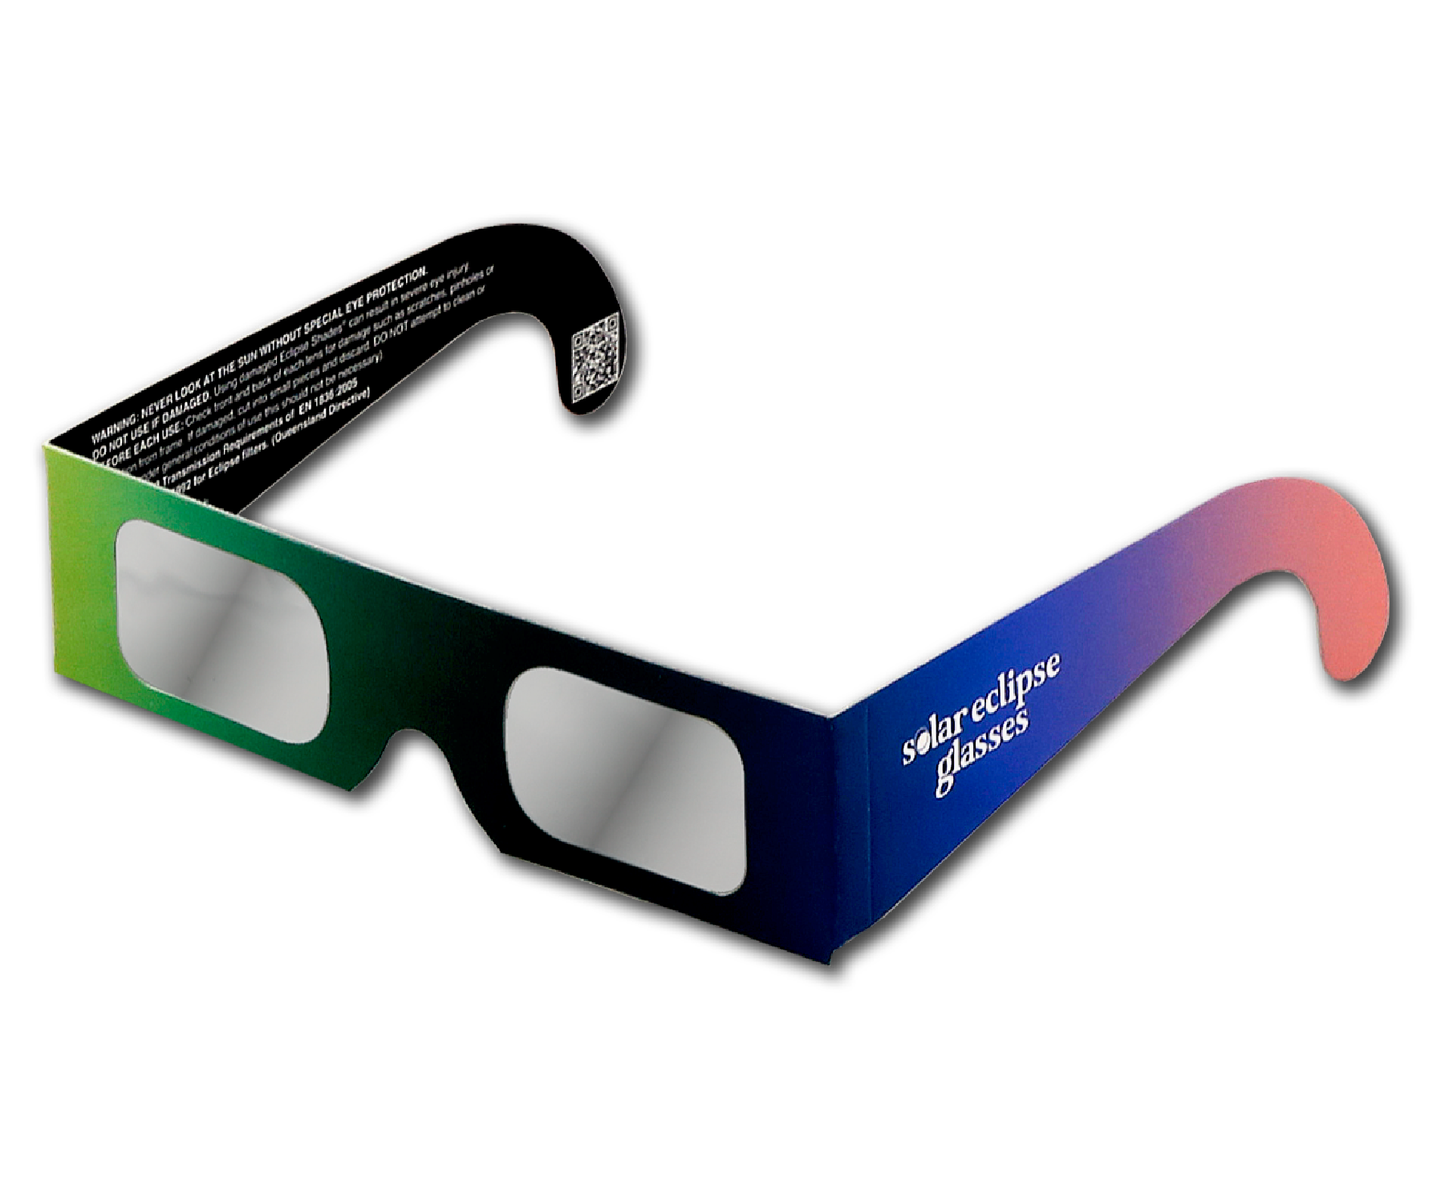 Solar Eclipse Glasses View Eclipses Safely With Amazing Clarity